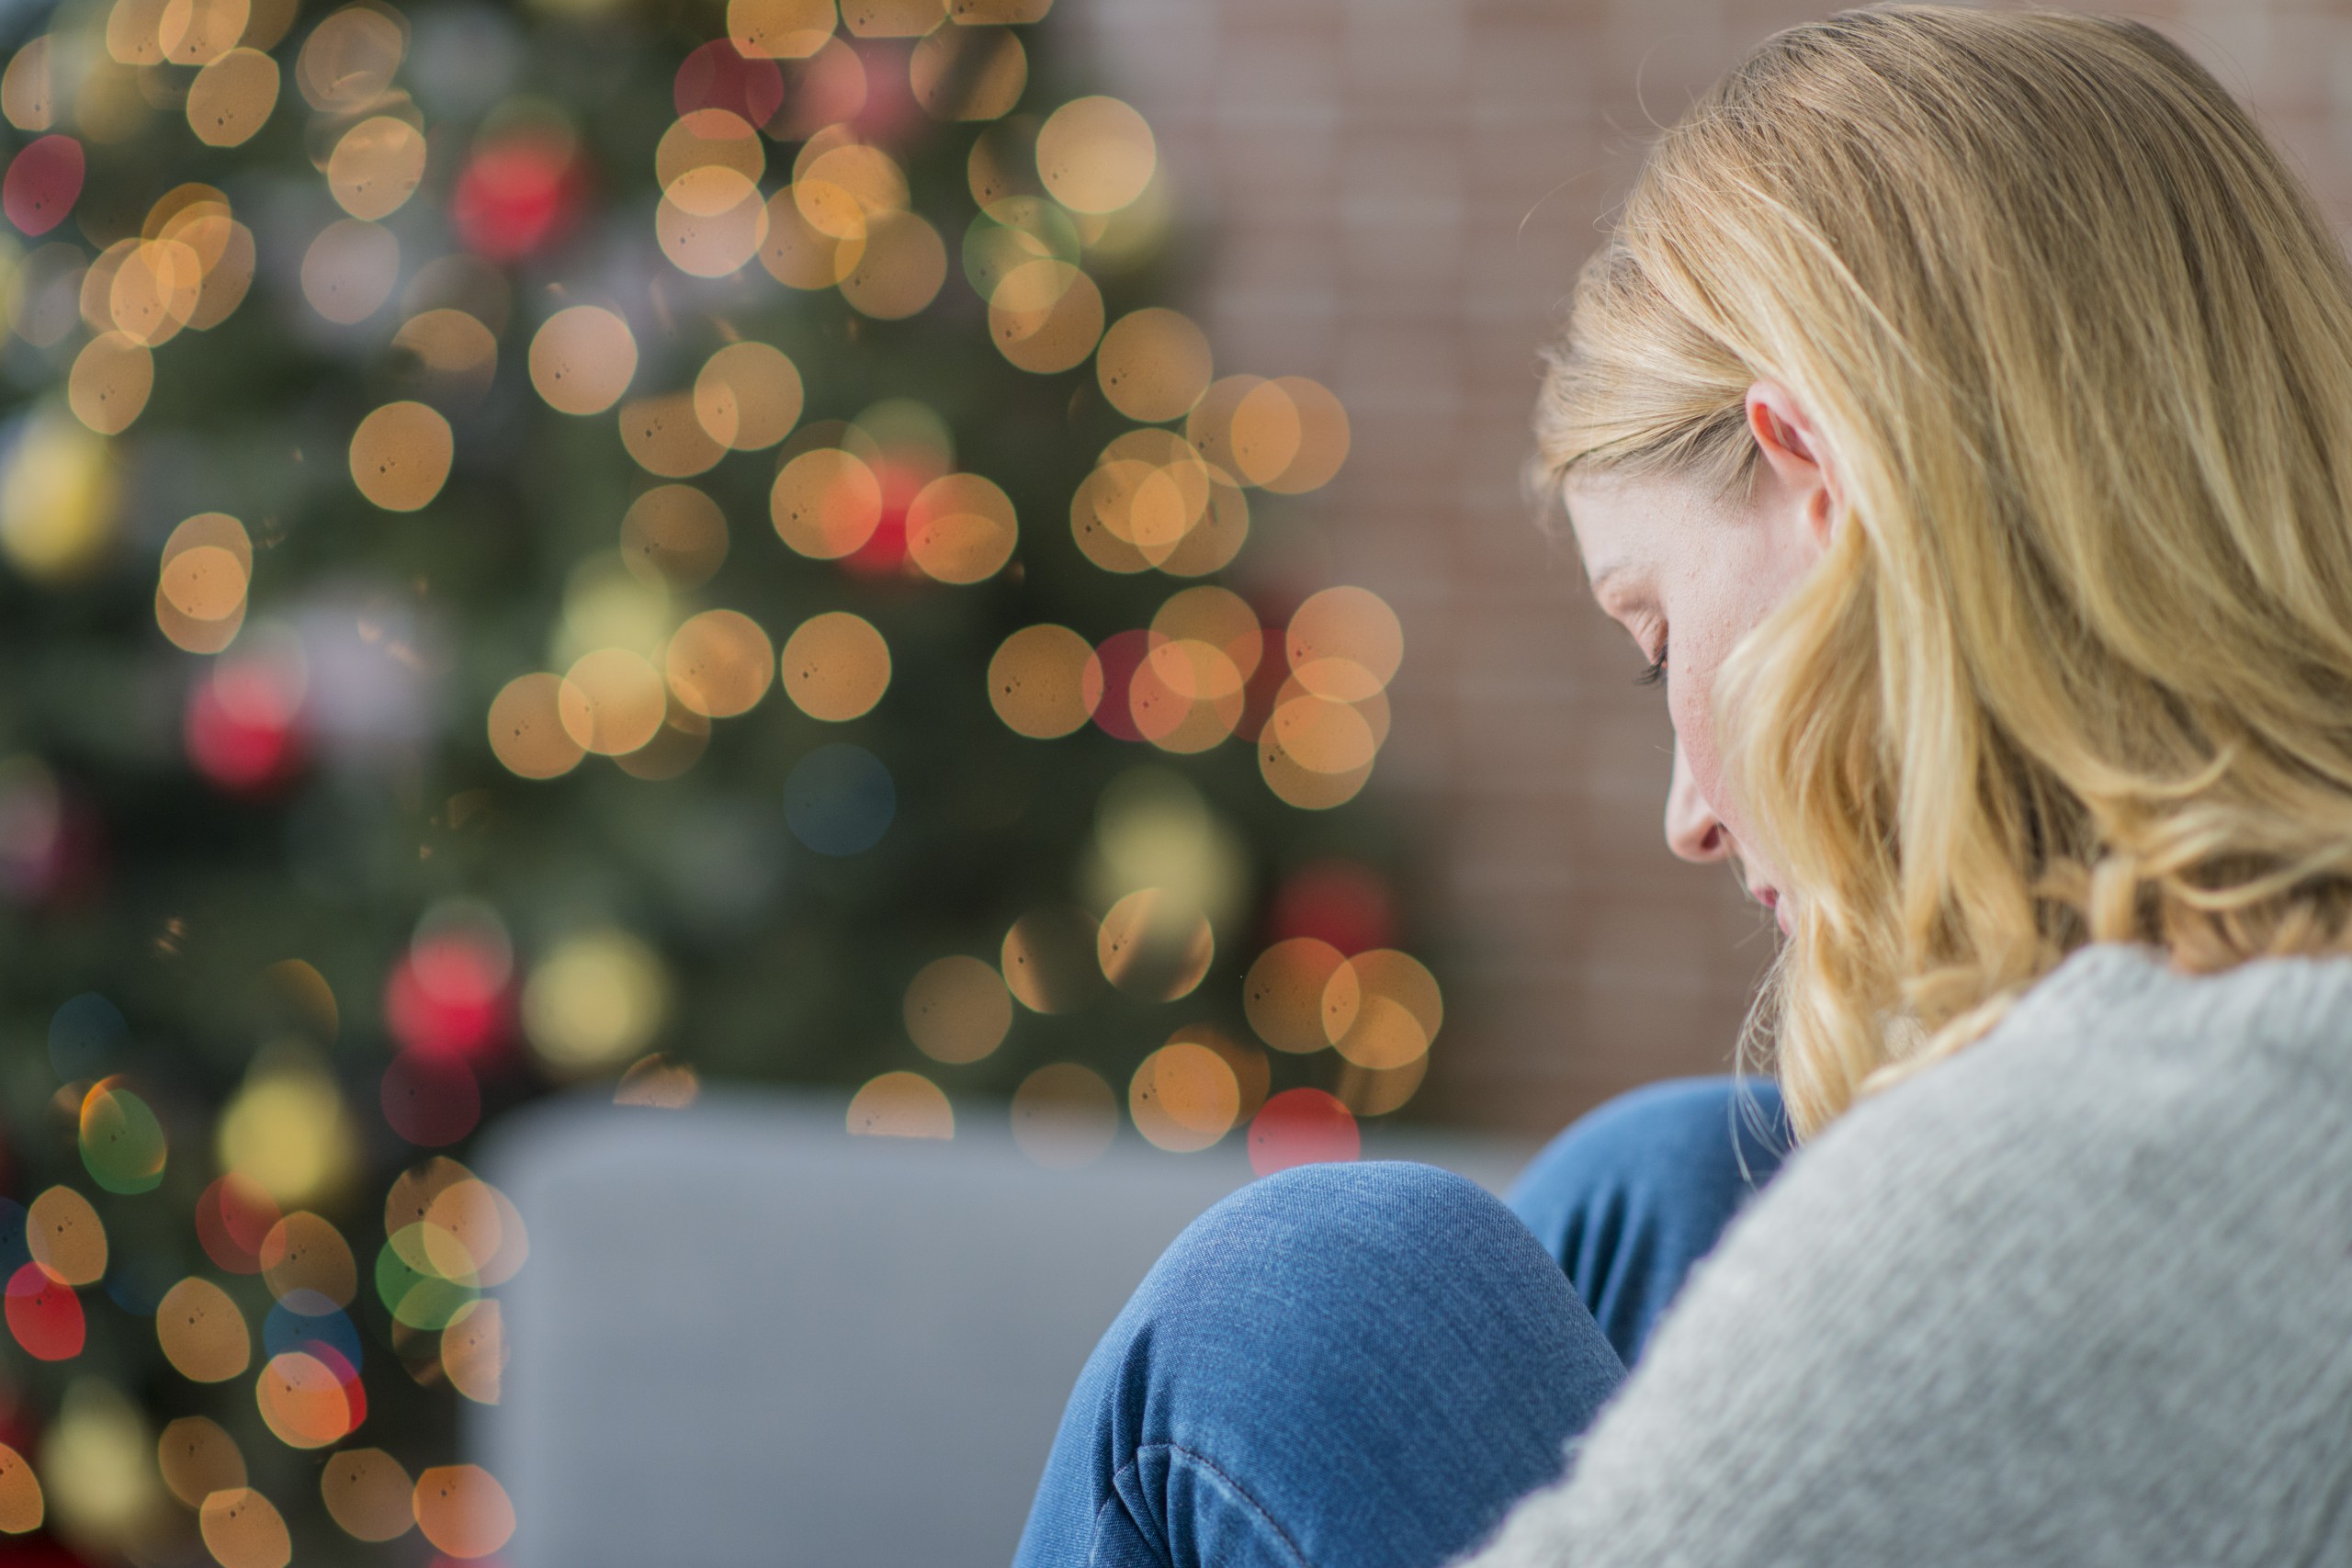 15 Tips for Coping with Holiday Grief